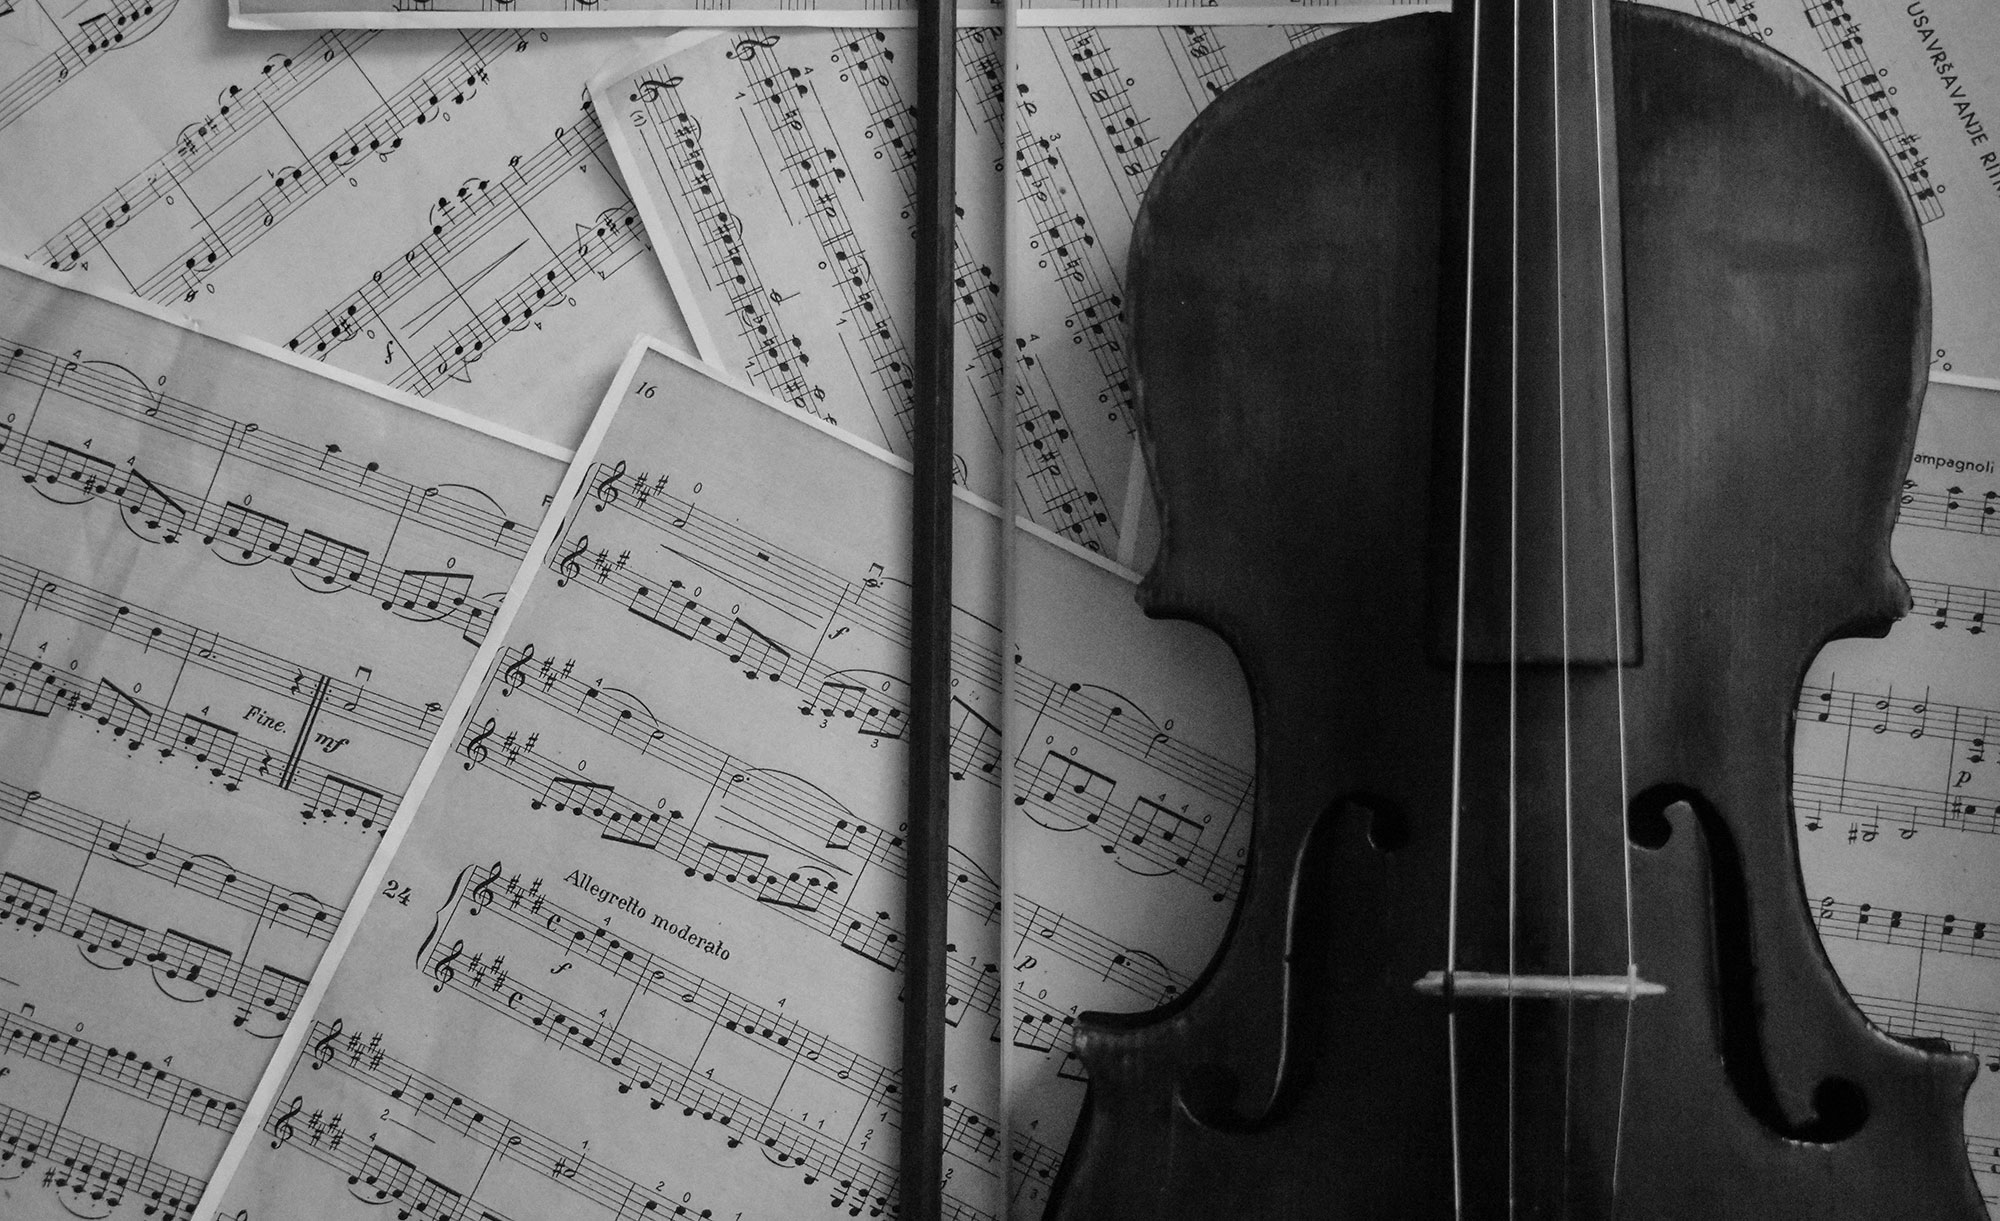 Image of violin with sheet music